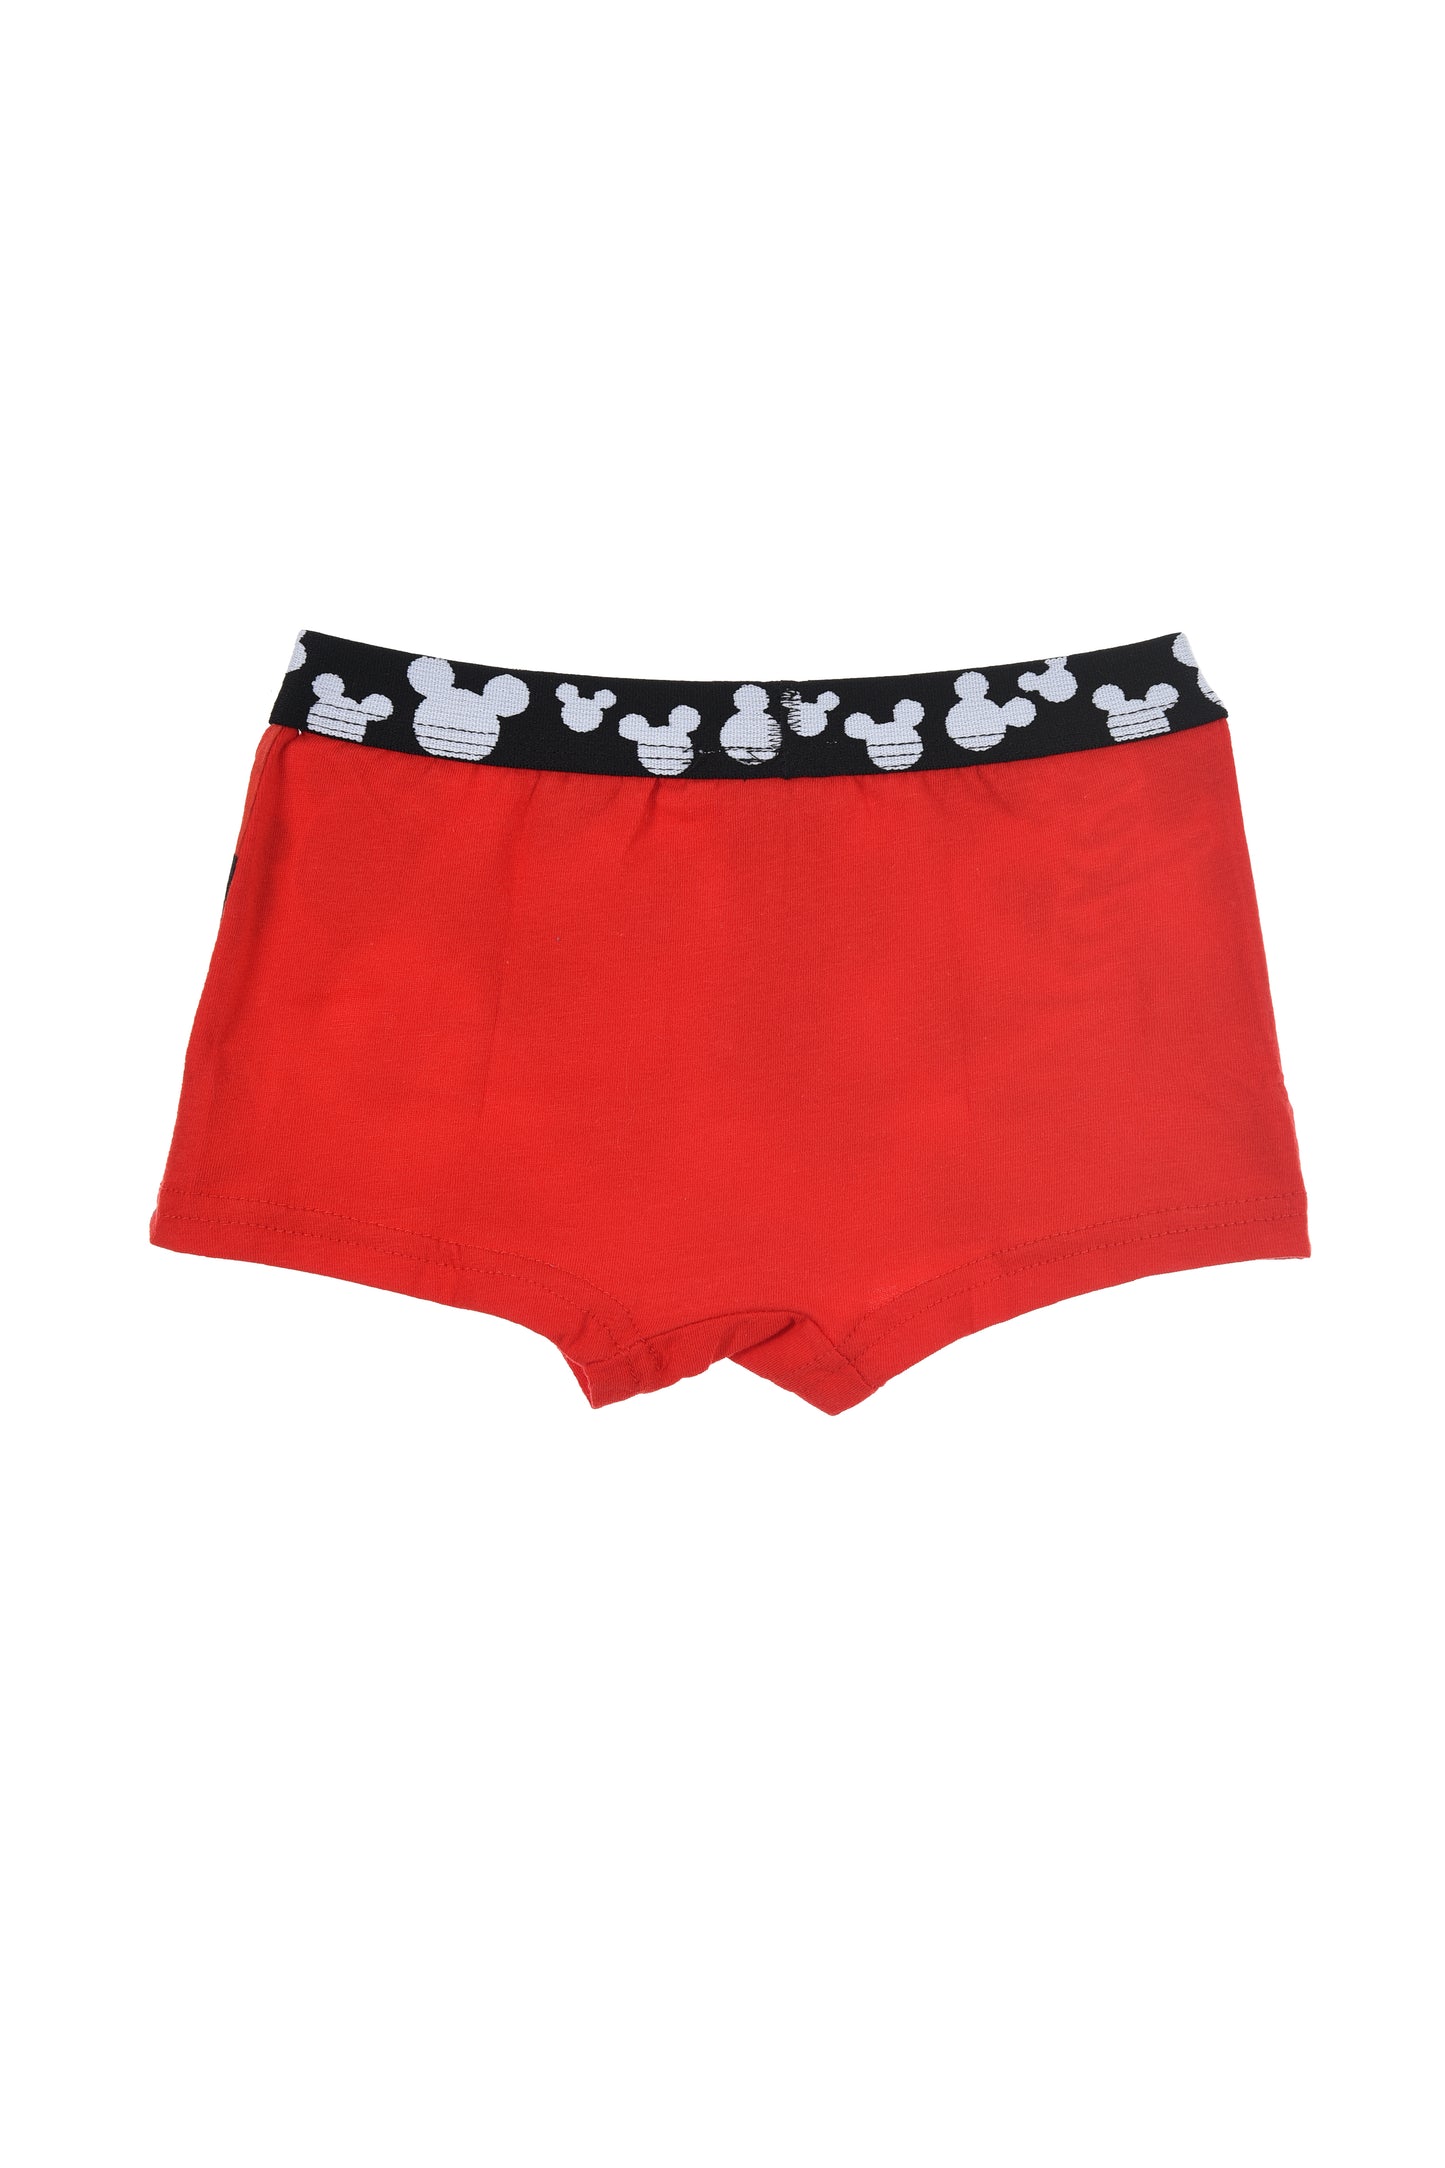 Disney Mens All Over Mickey Mouse Boxers